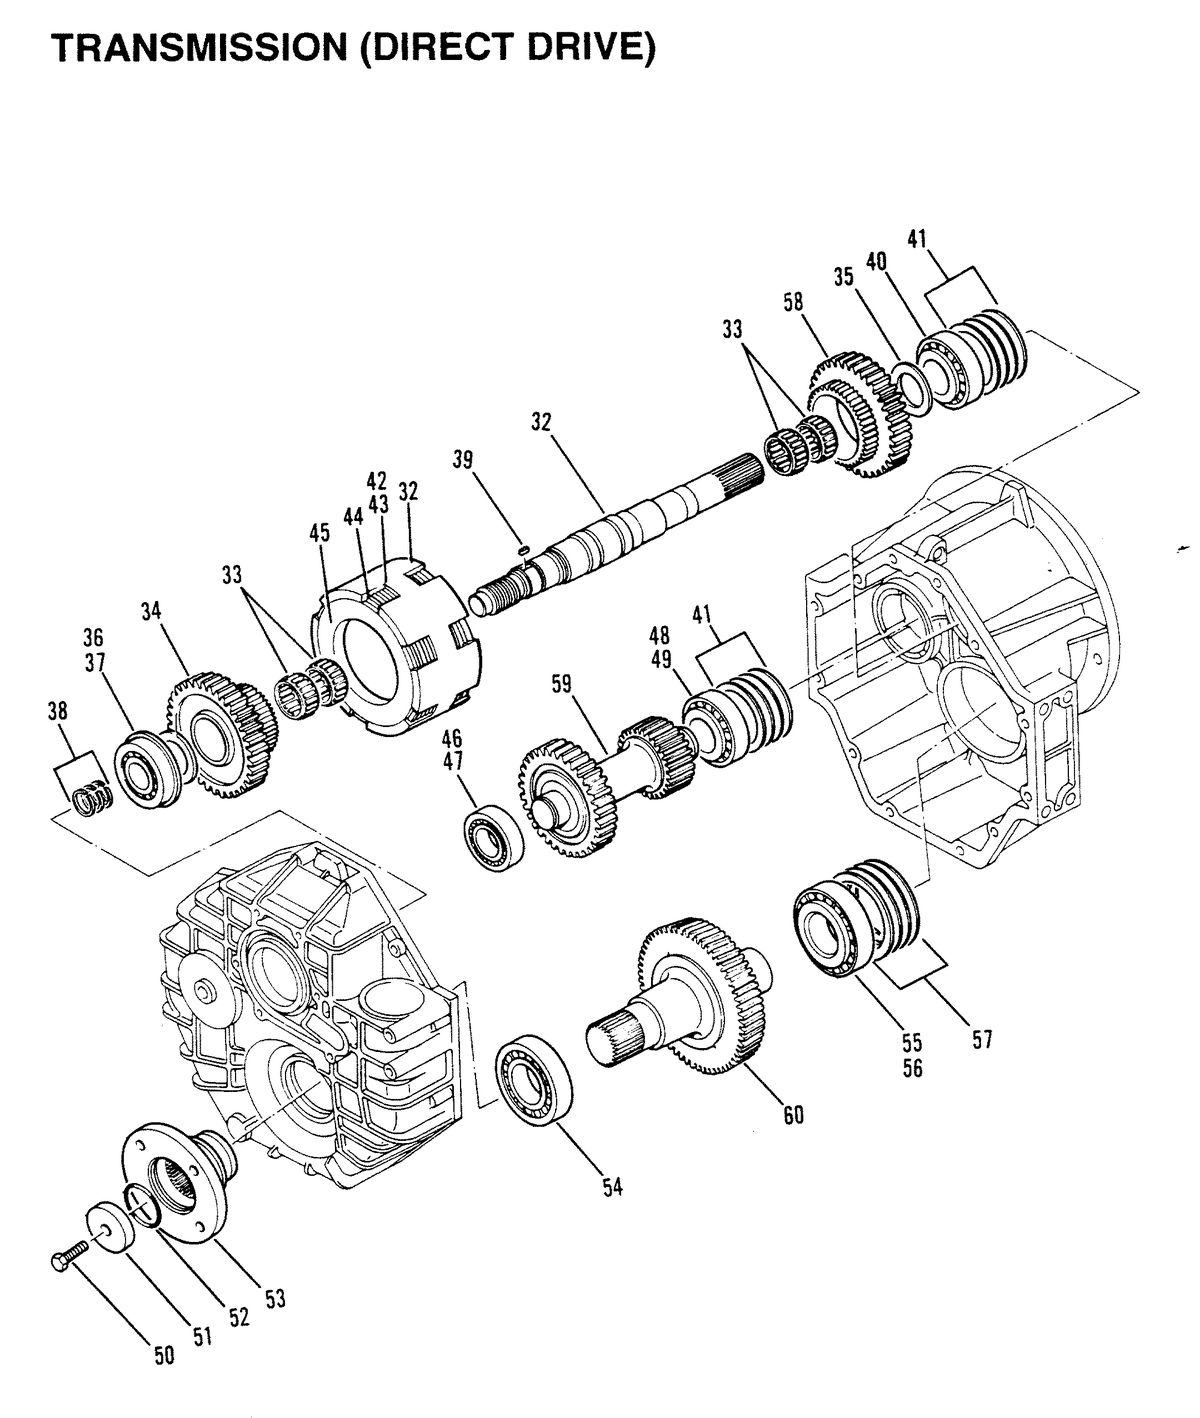 MERCRUISER D-254 TURBO ACDIESEL ENGINE STERN DRIVE/INBOARD TRANSMISSION (DIRECT DRIVE) (INBOARD)